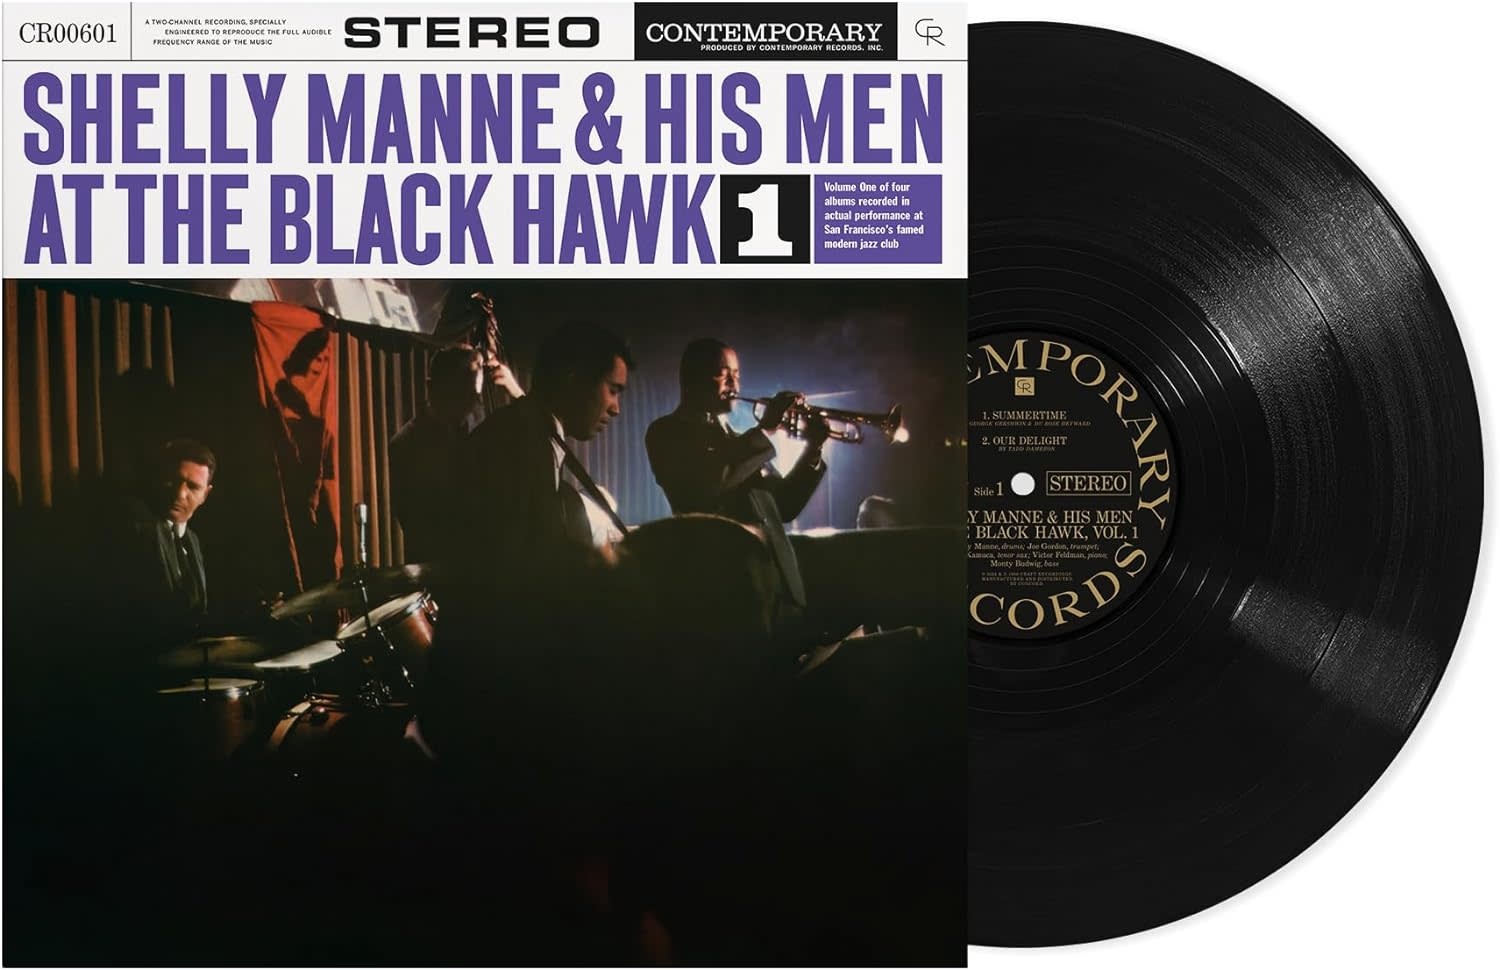 Shelly Manne & His Men – At The Black Hawk Vol. 1